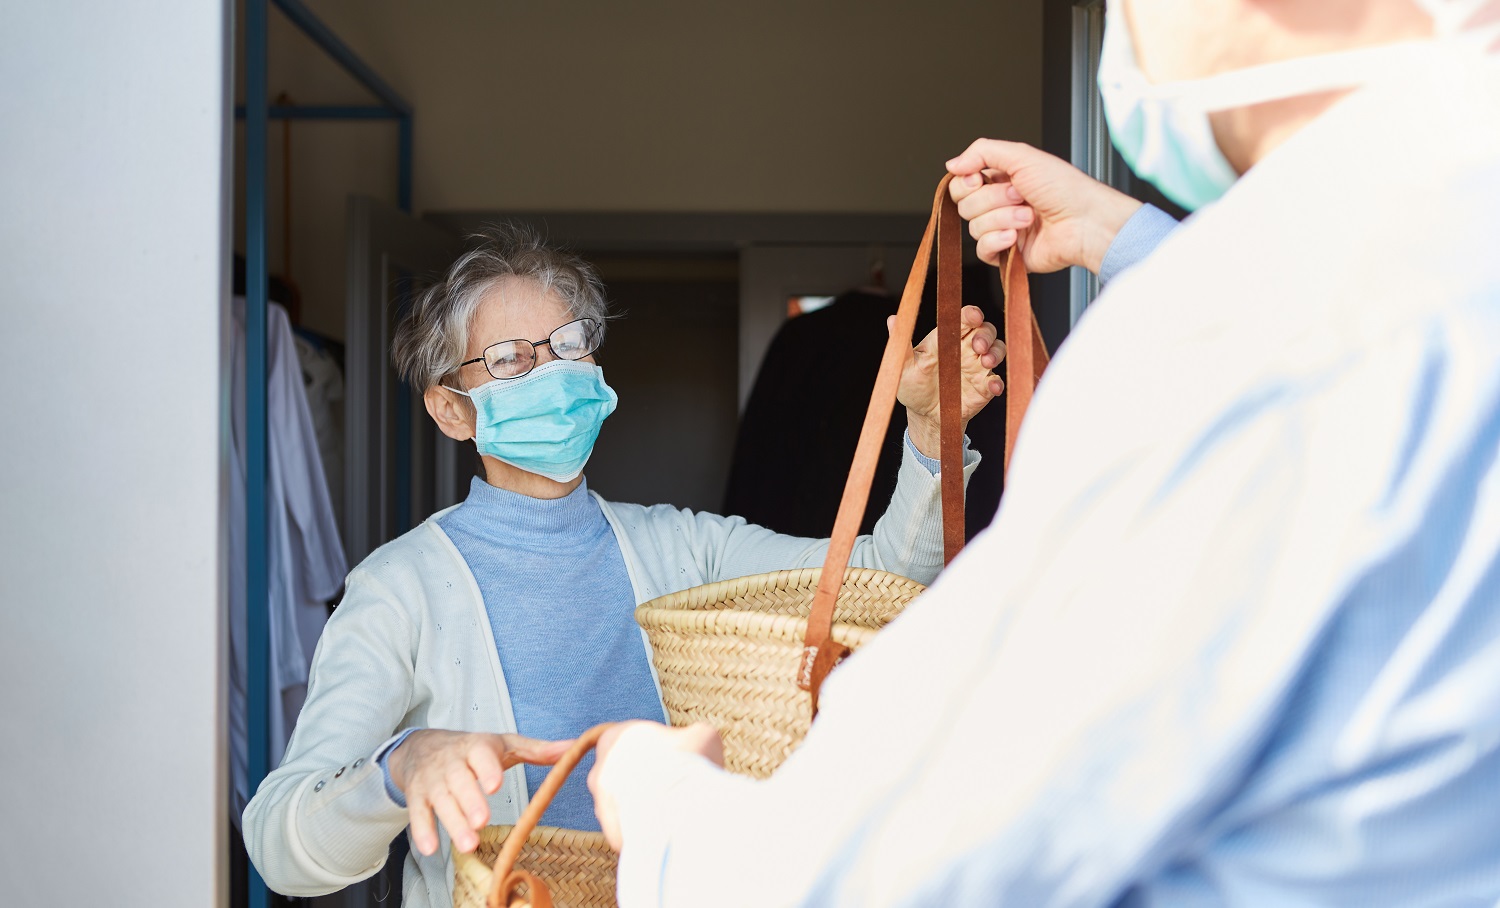 Grocery delivery service for elderly in quarantine